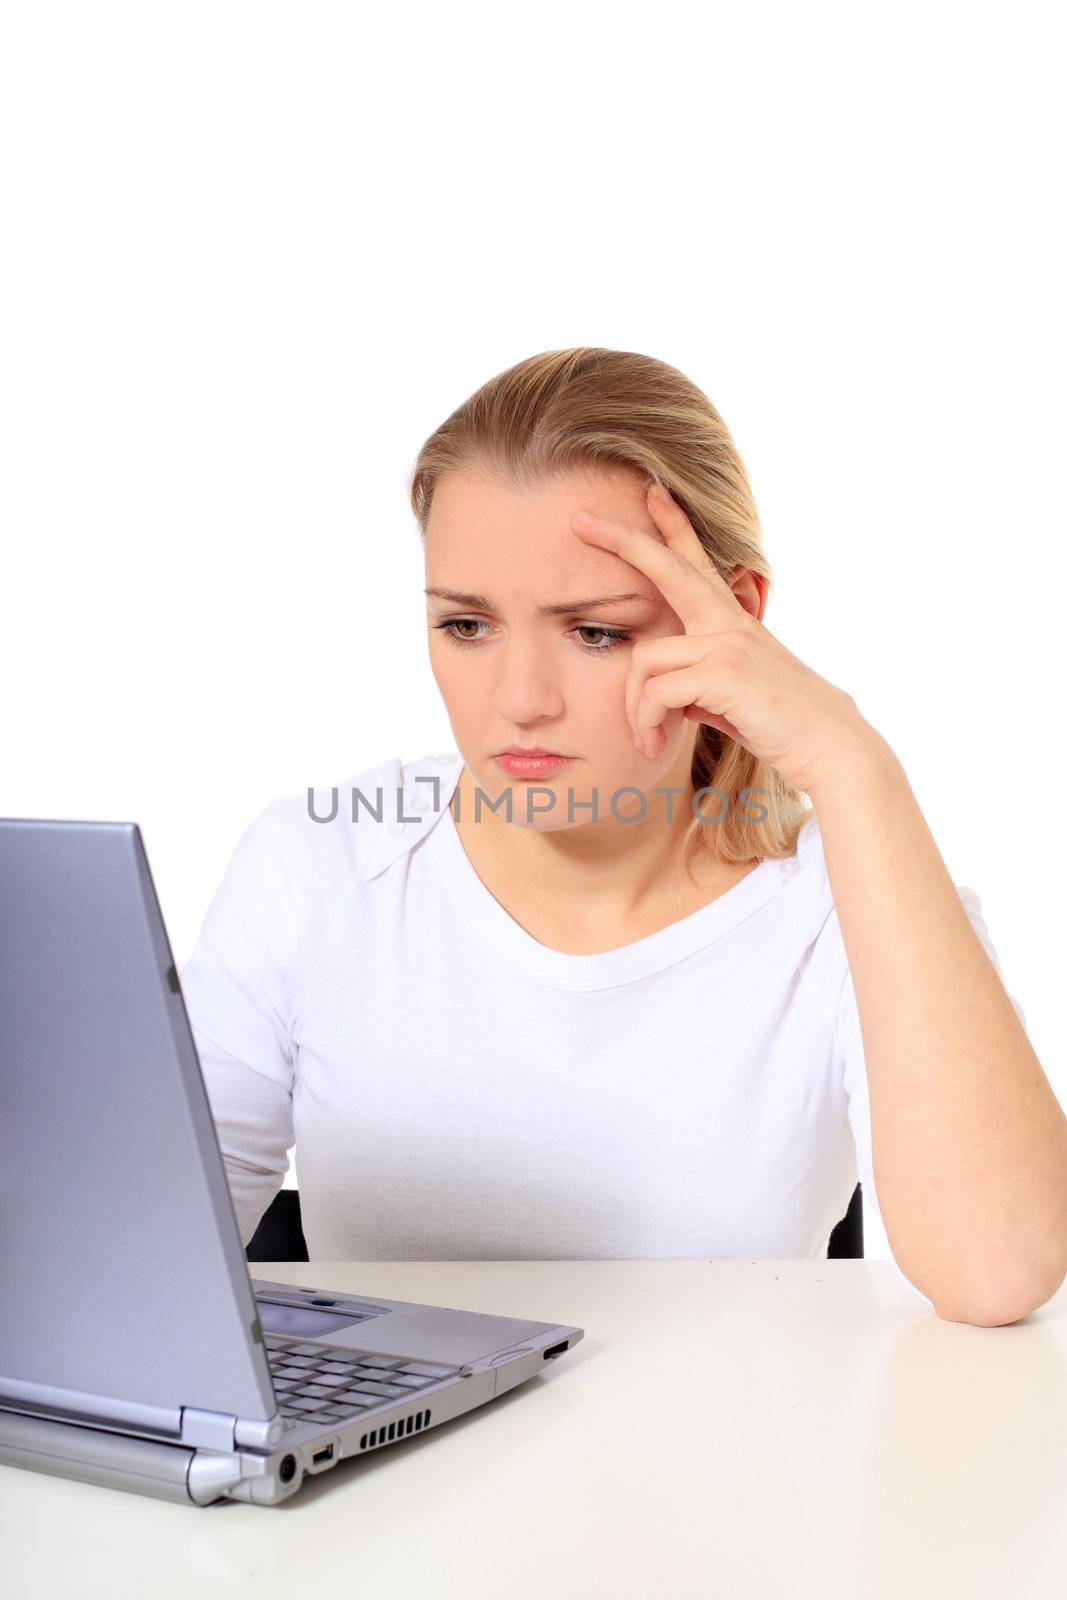 Attractive blond woman got a problem with her notebook computer. All on white background.